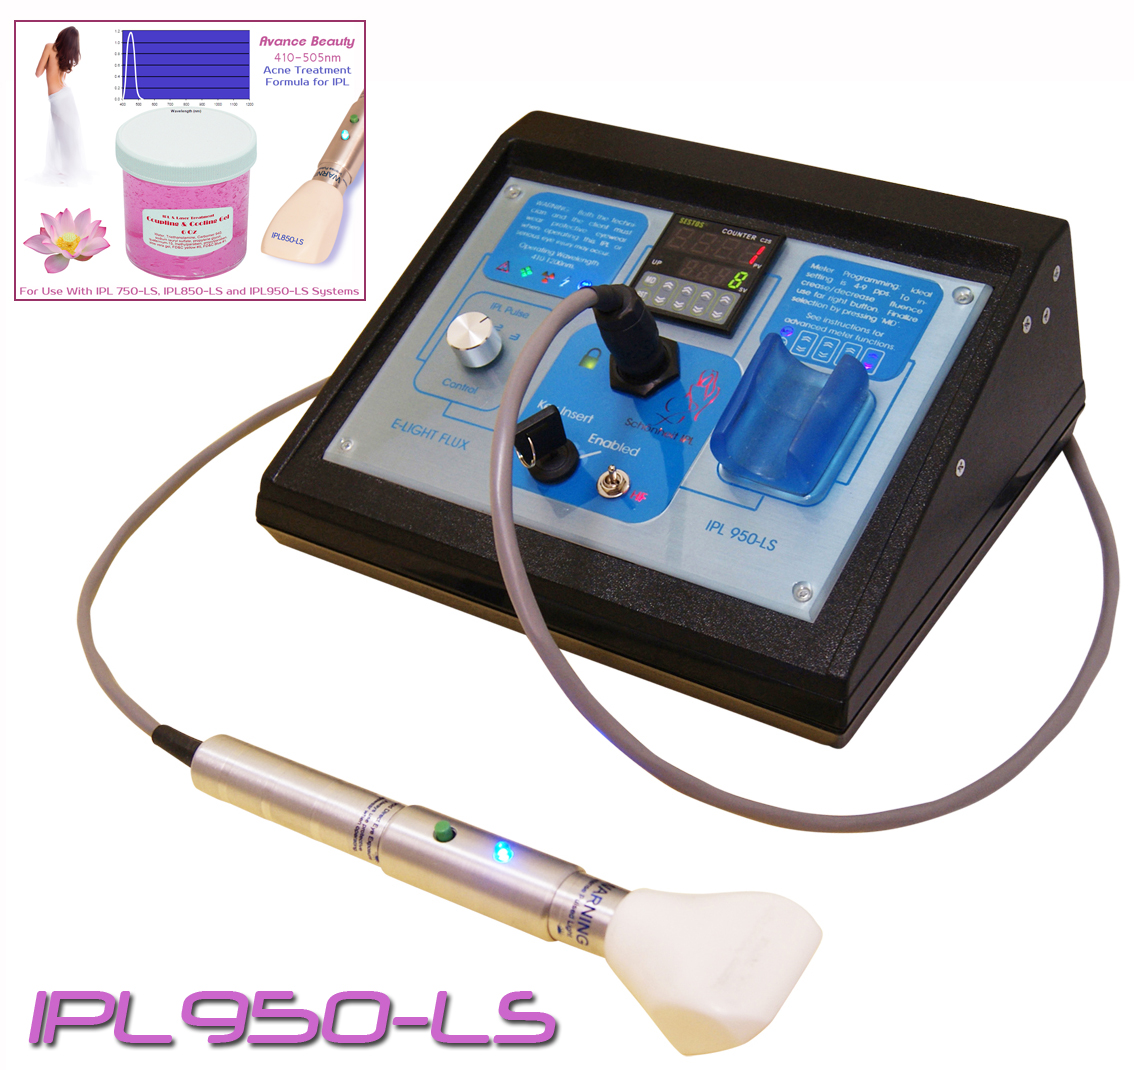 IPL950-LS Acne Treatment Filtering Gel Kit 400-505nm with Beauty Treatment Machine, System, Device.  642057128575